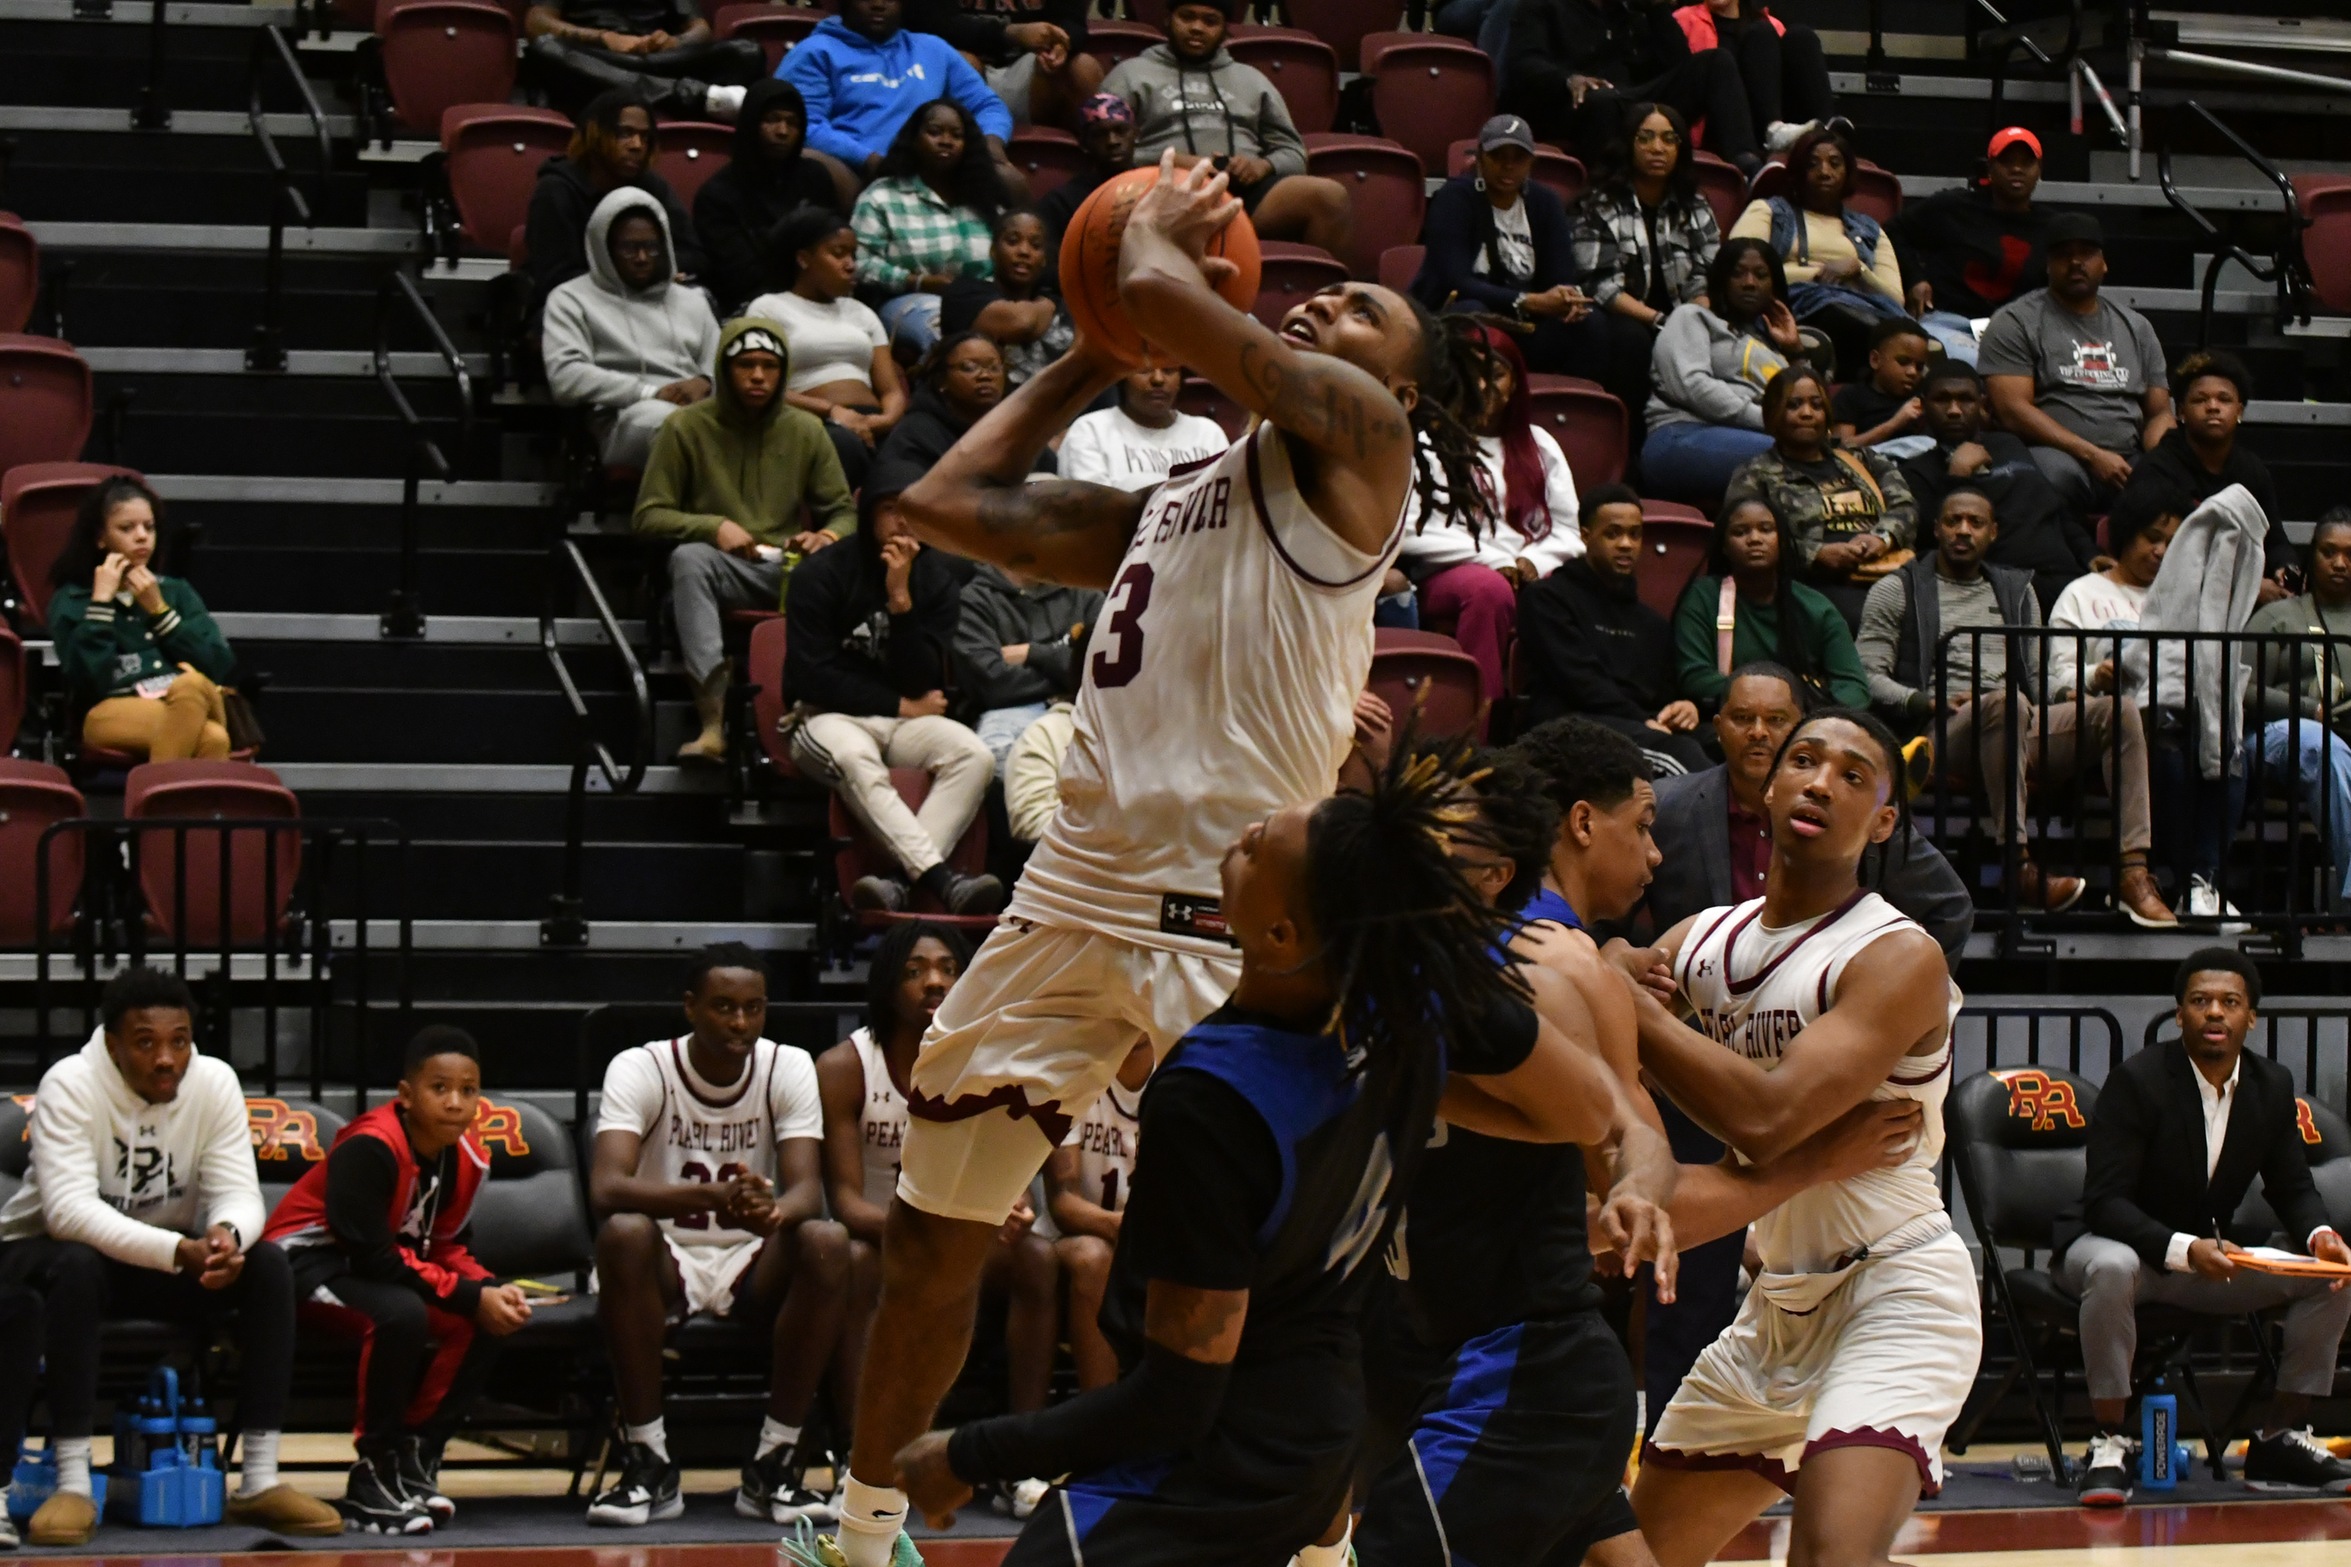 Pearl River wraps up conference play at Northeast